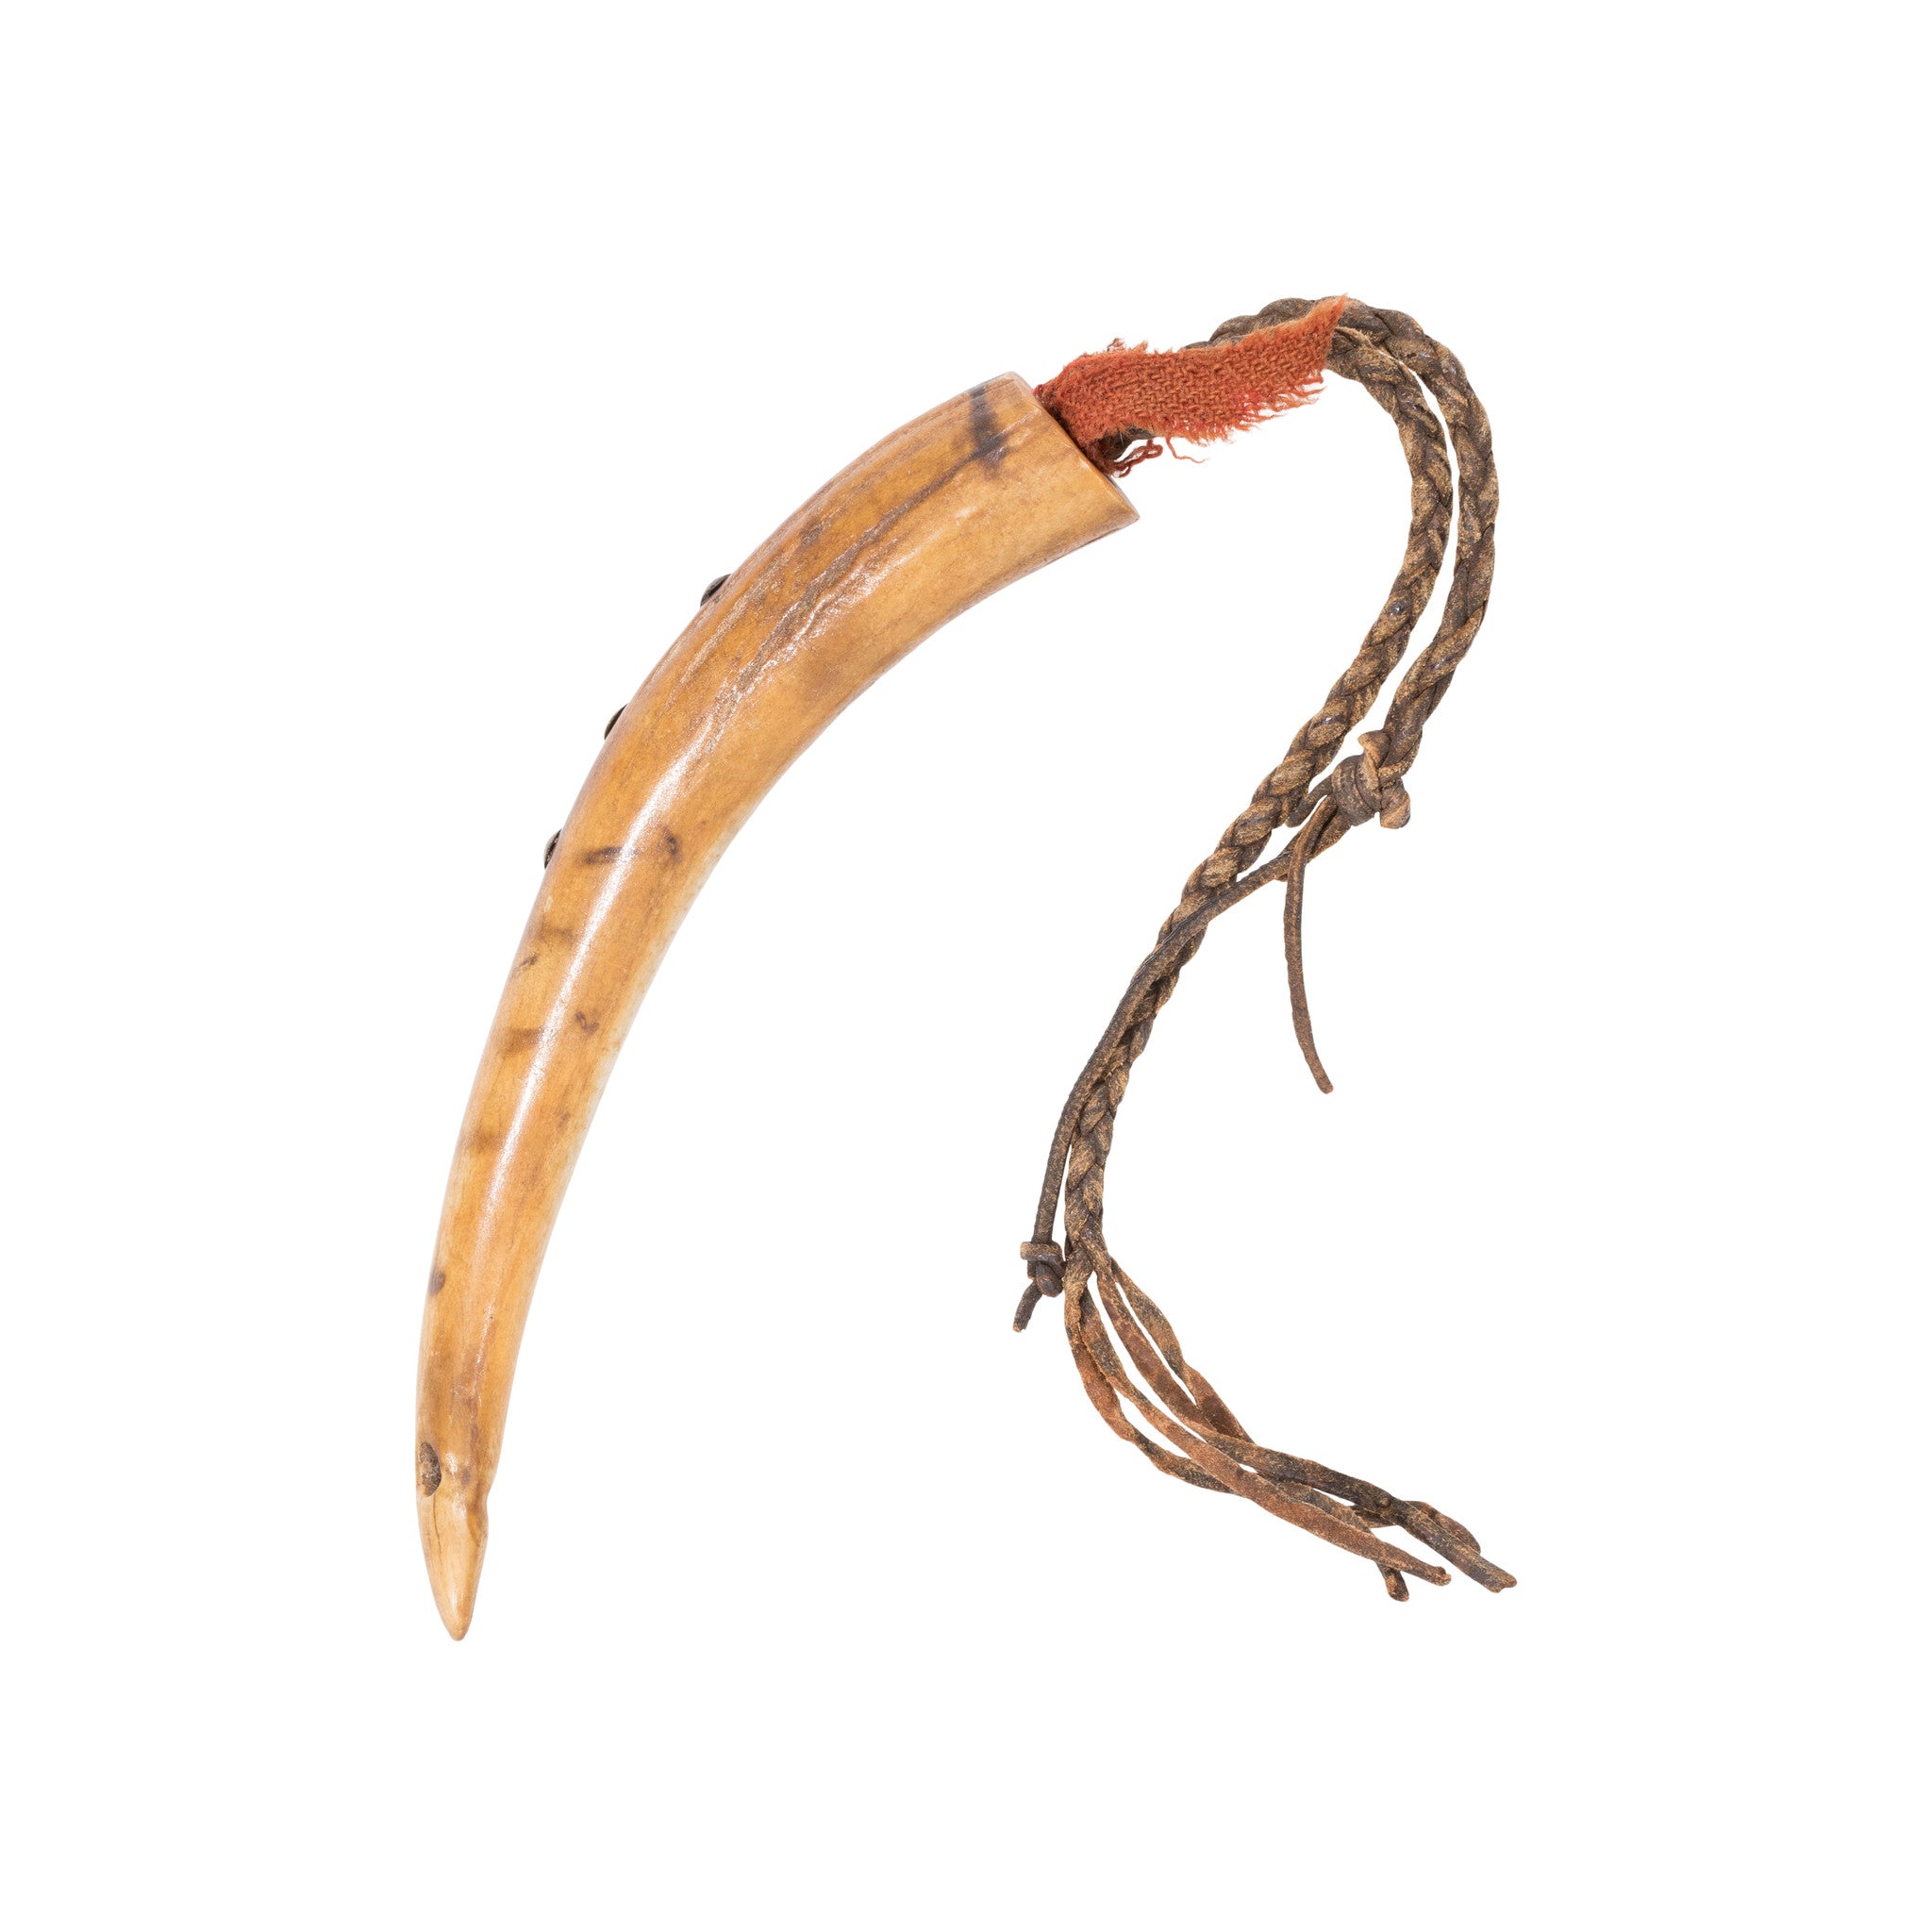 Southern Cheyenne Antler Studded Quirt